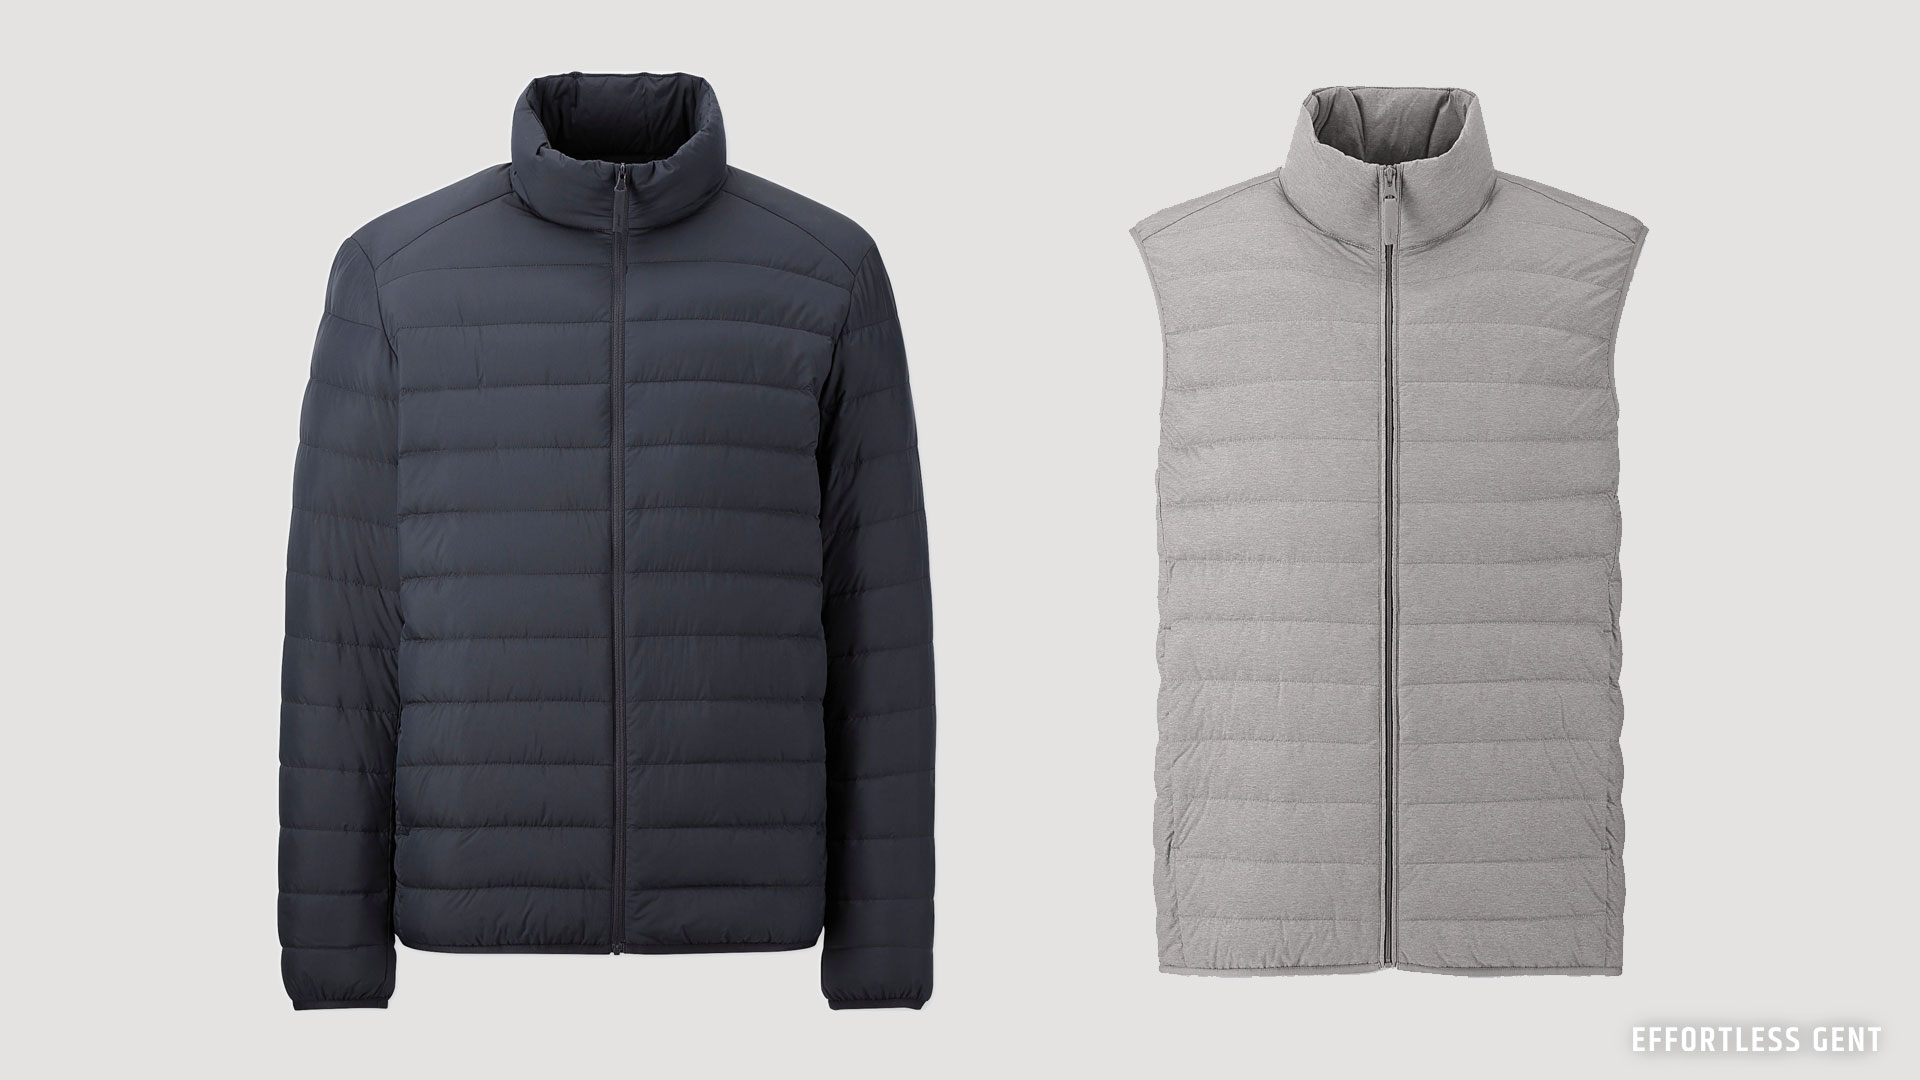 Uniqlo's Ultra Light down jacket and vest are great for the budget lean wardrobe